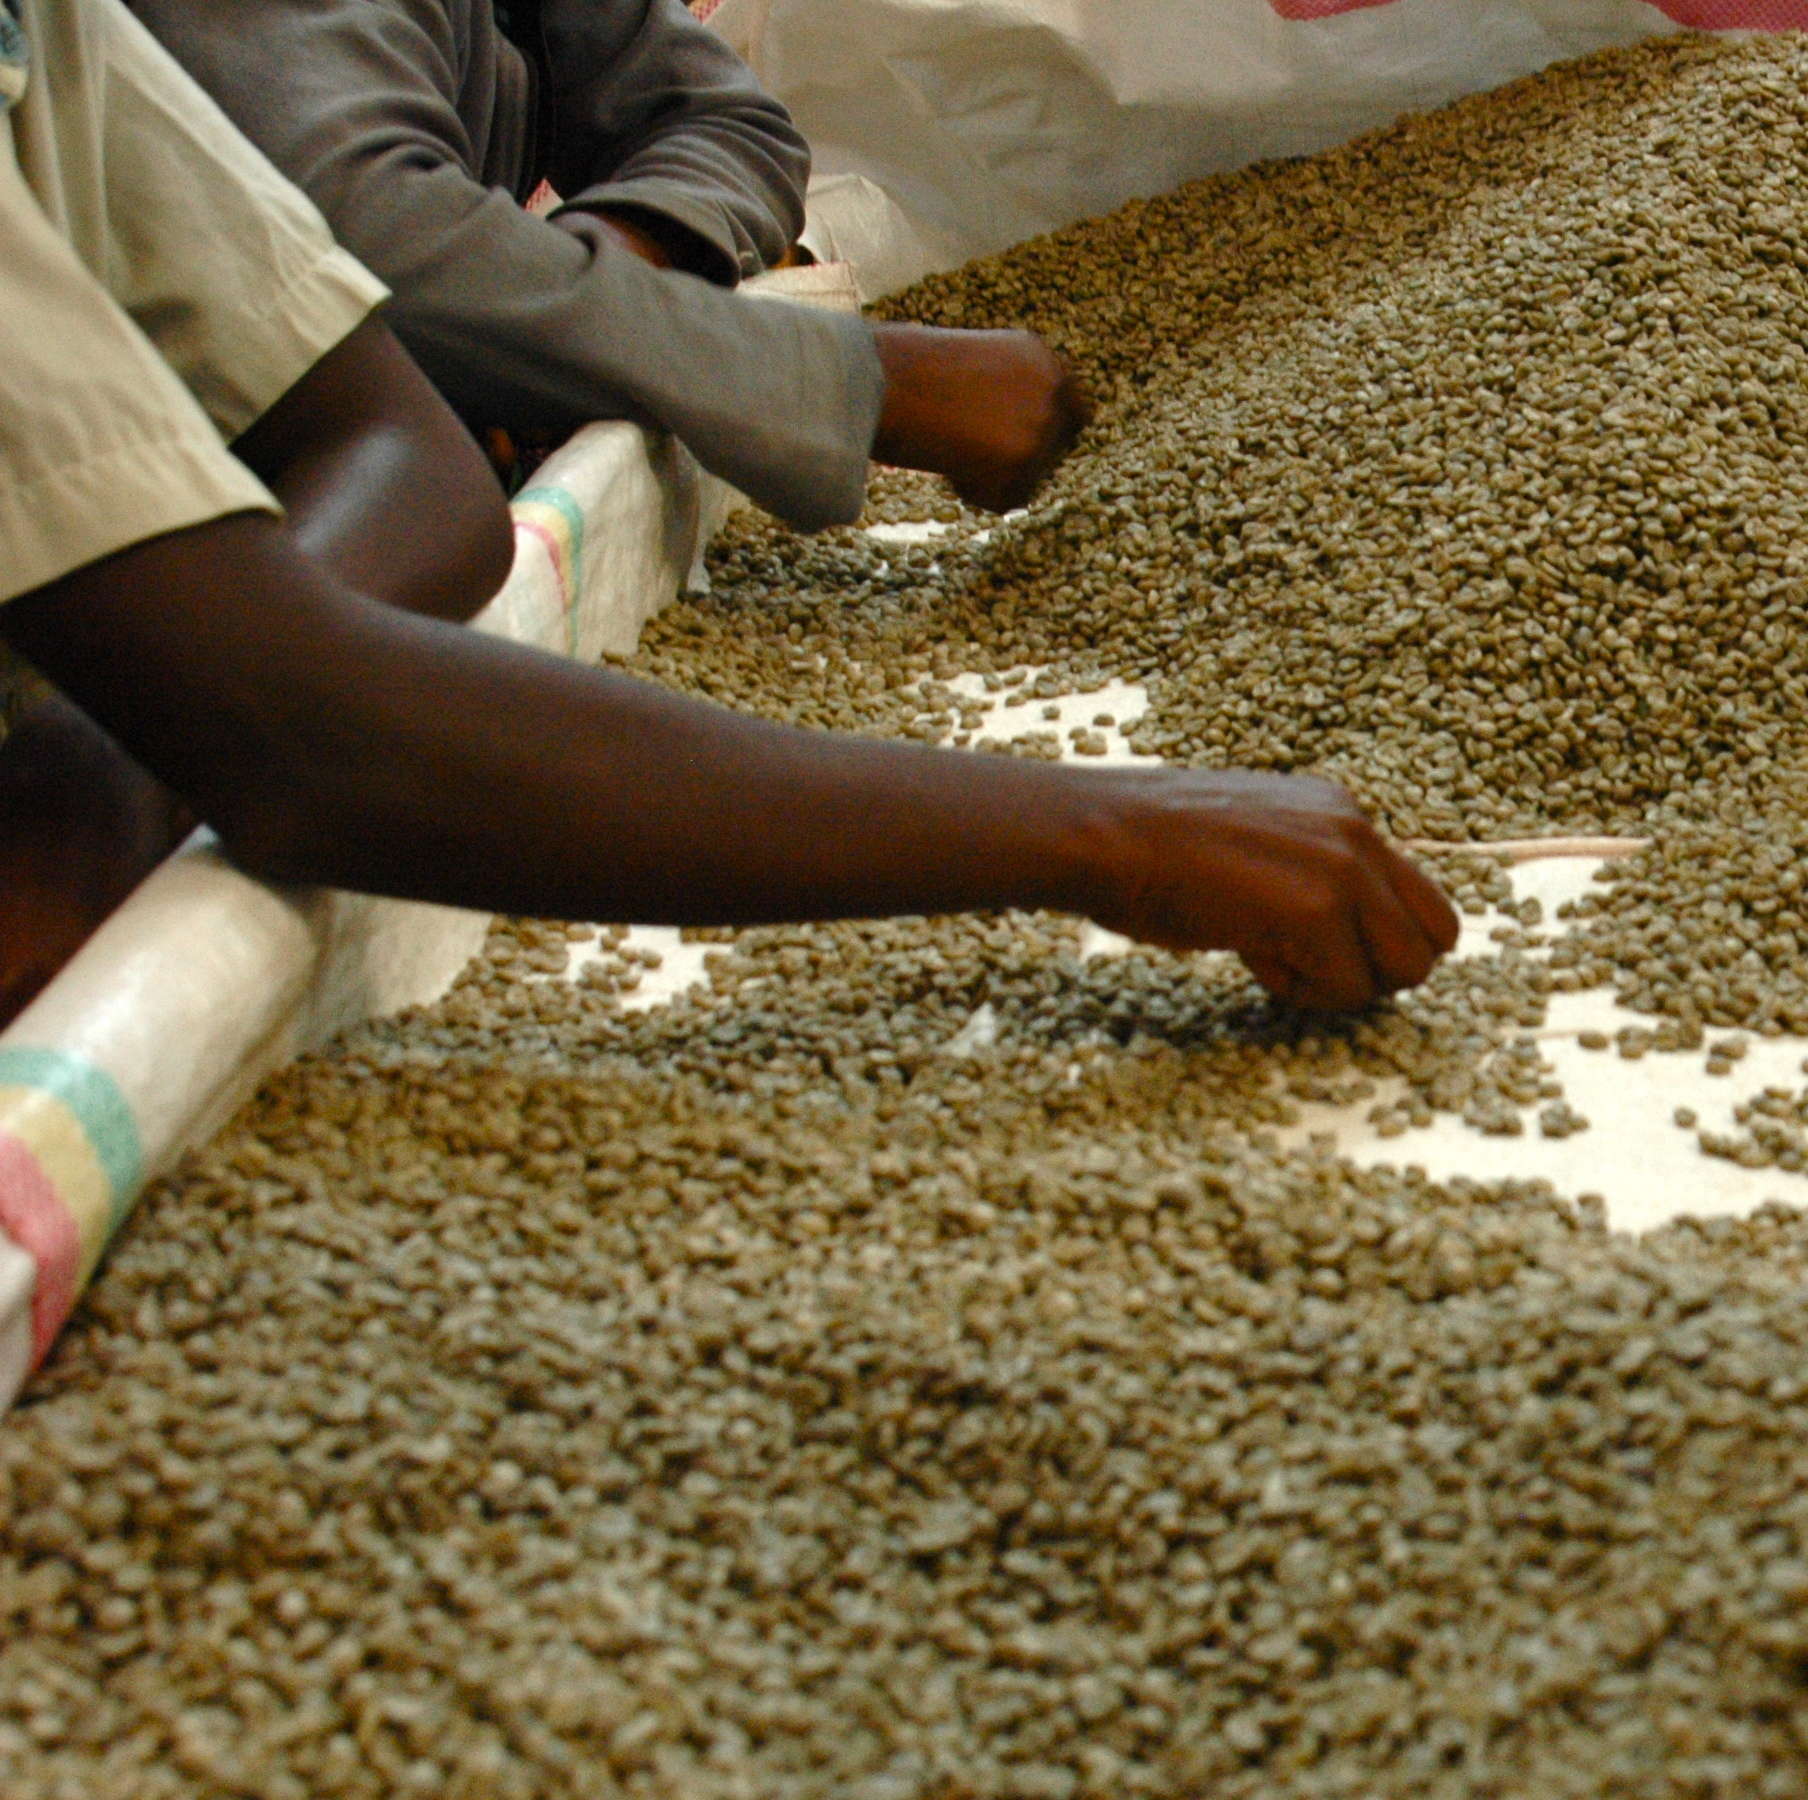 The first round of LINK focuses on Rwandan coffee